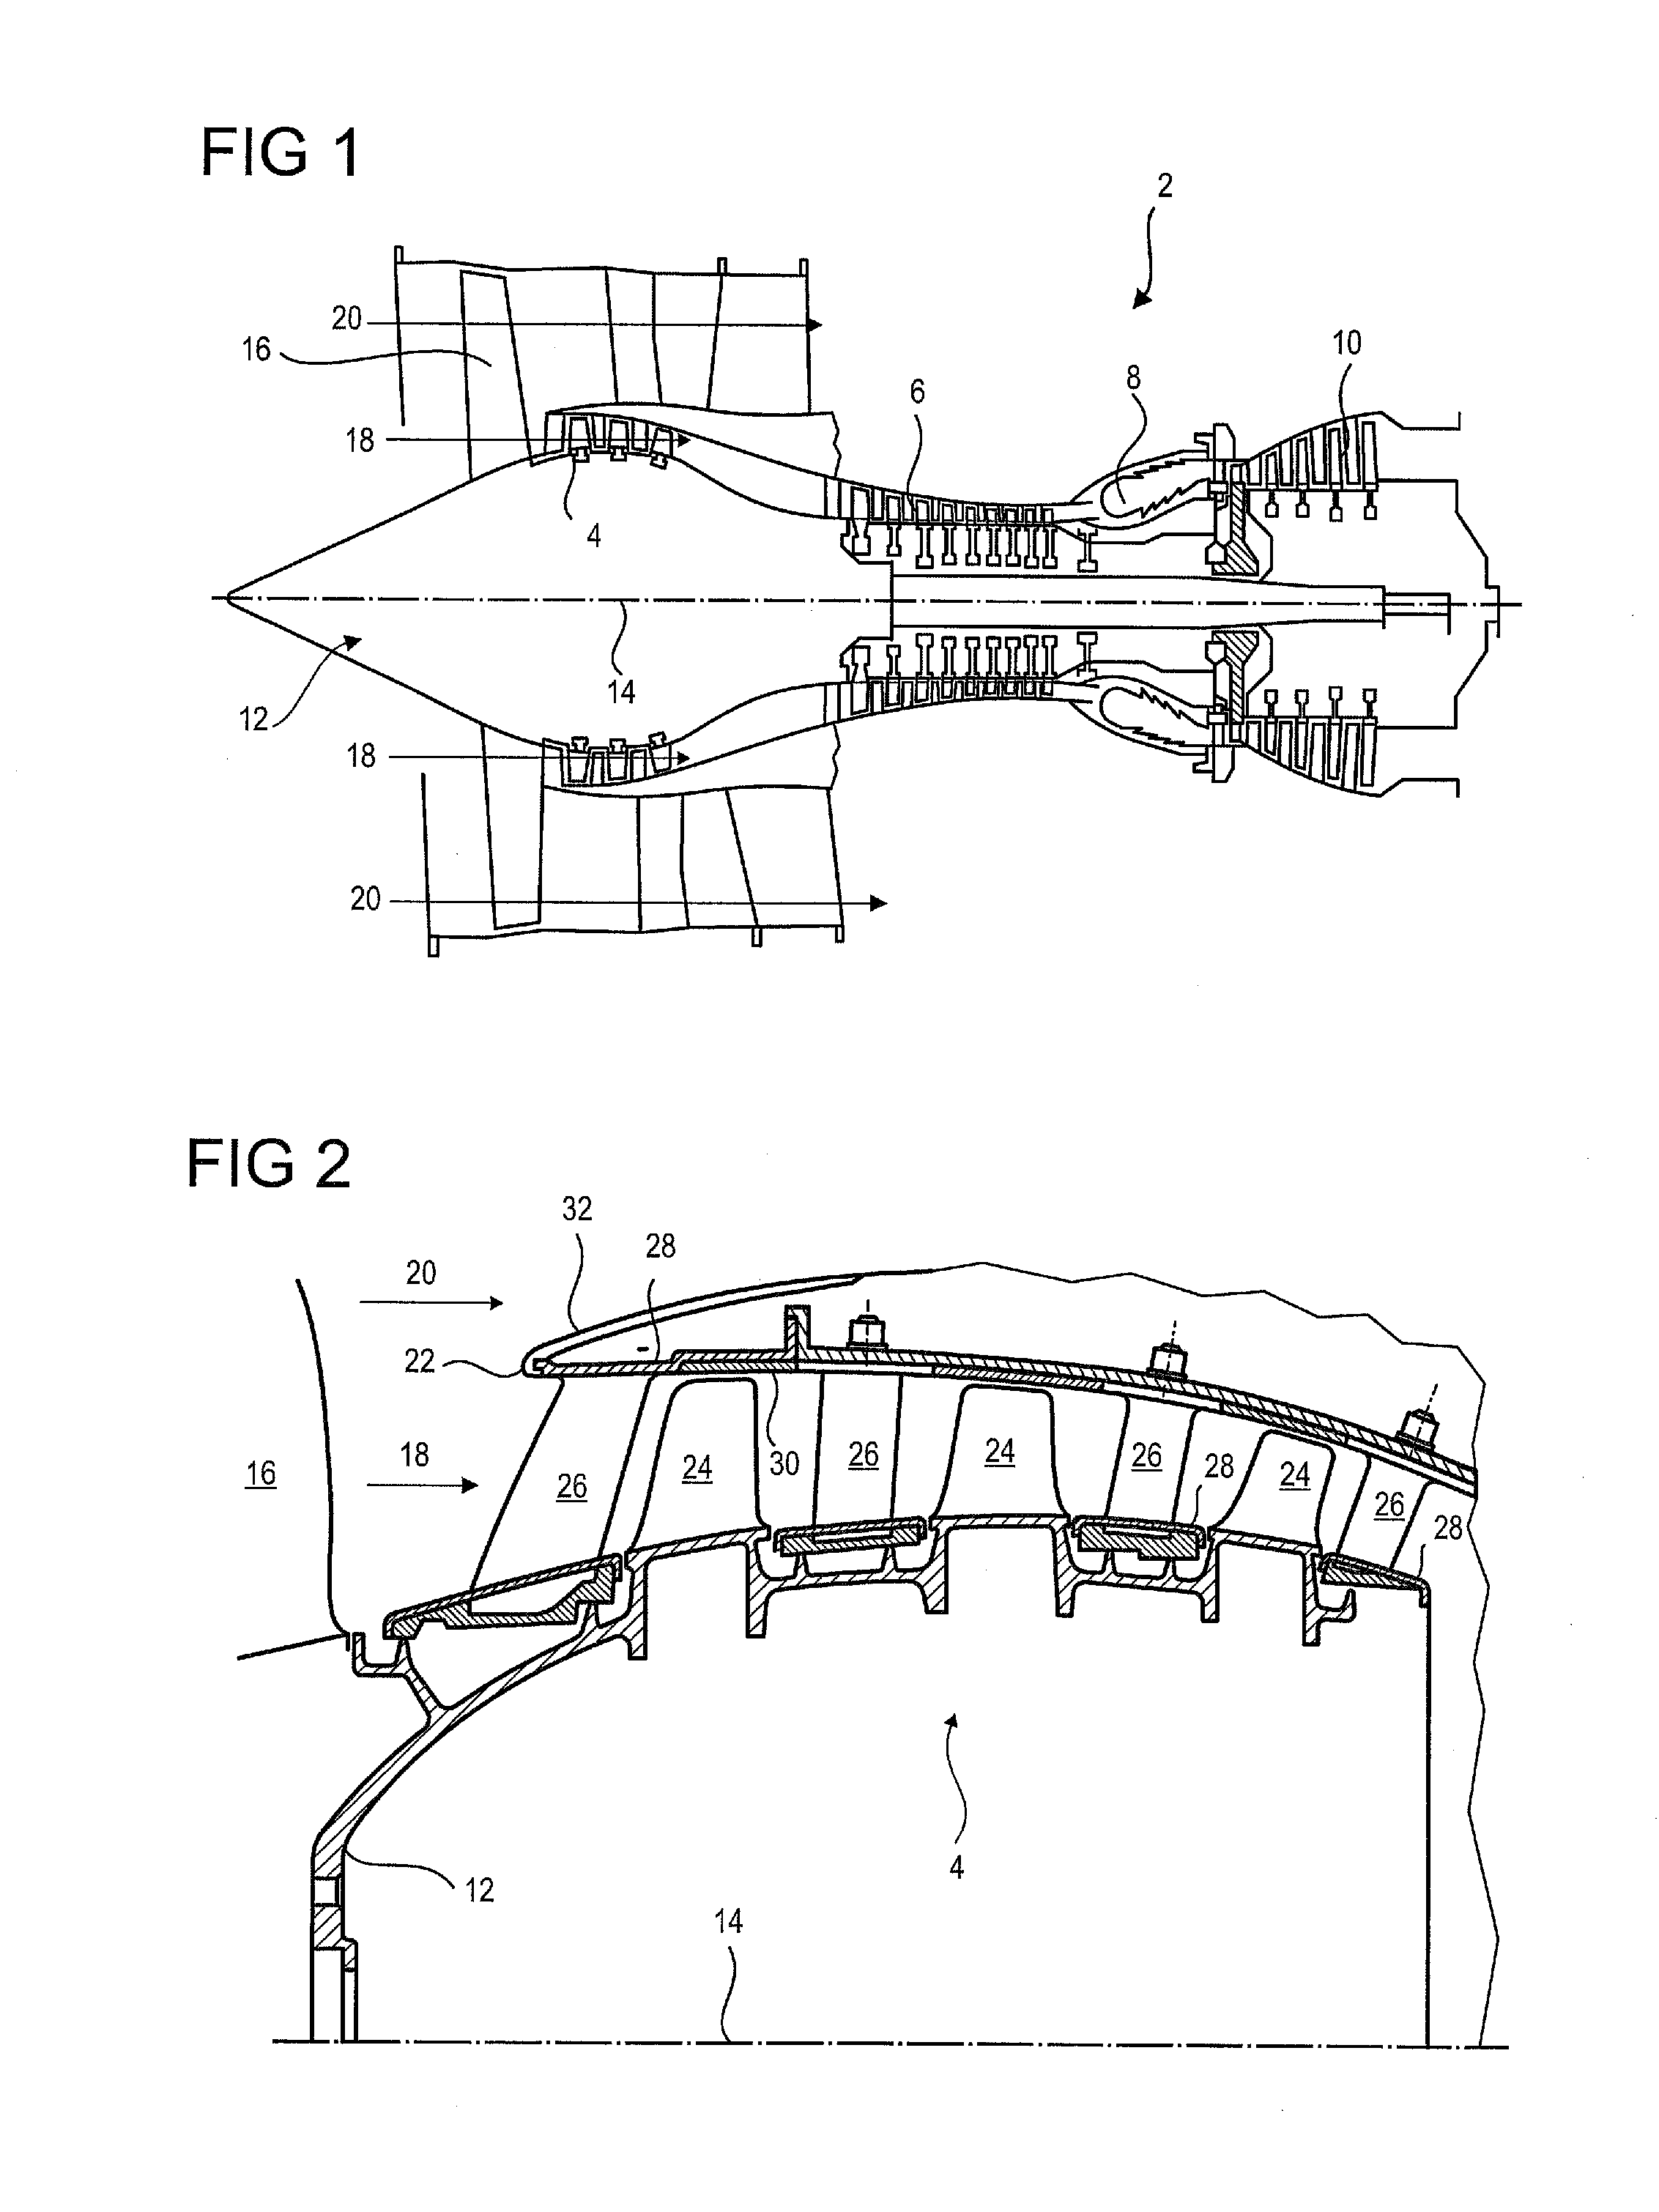 Axial turbomachine blade with platforms having an angular profile